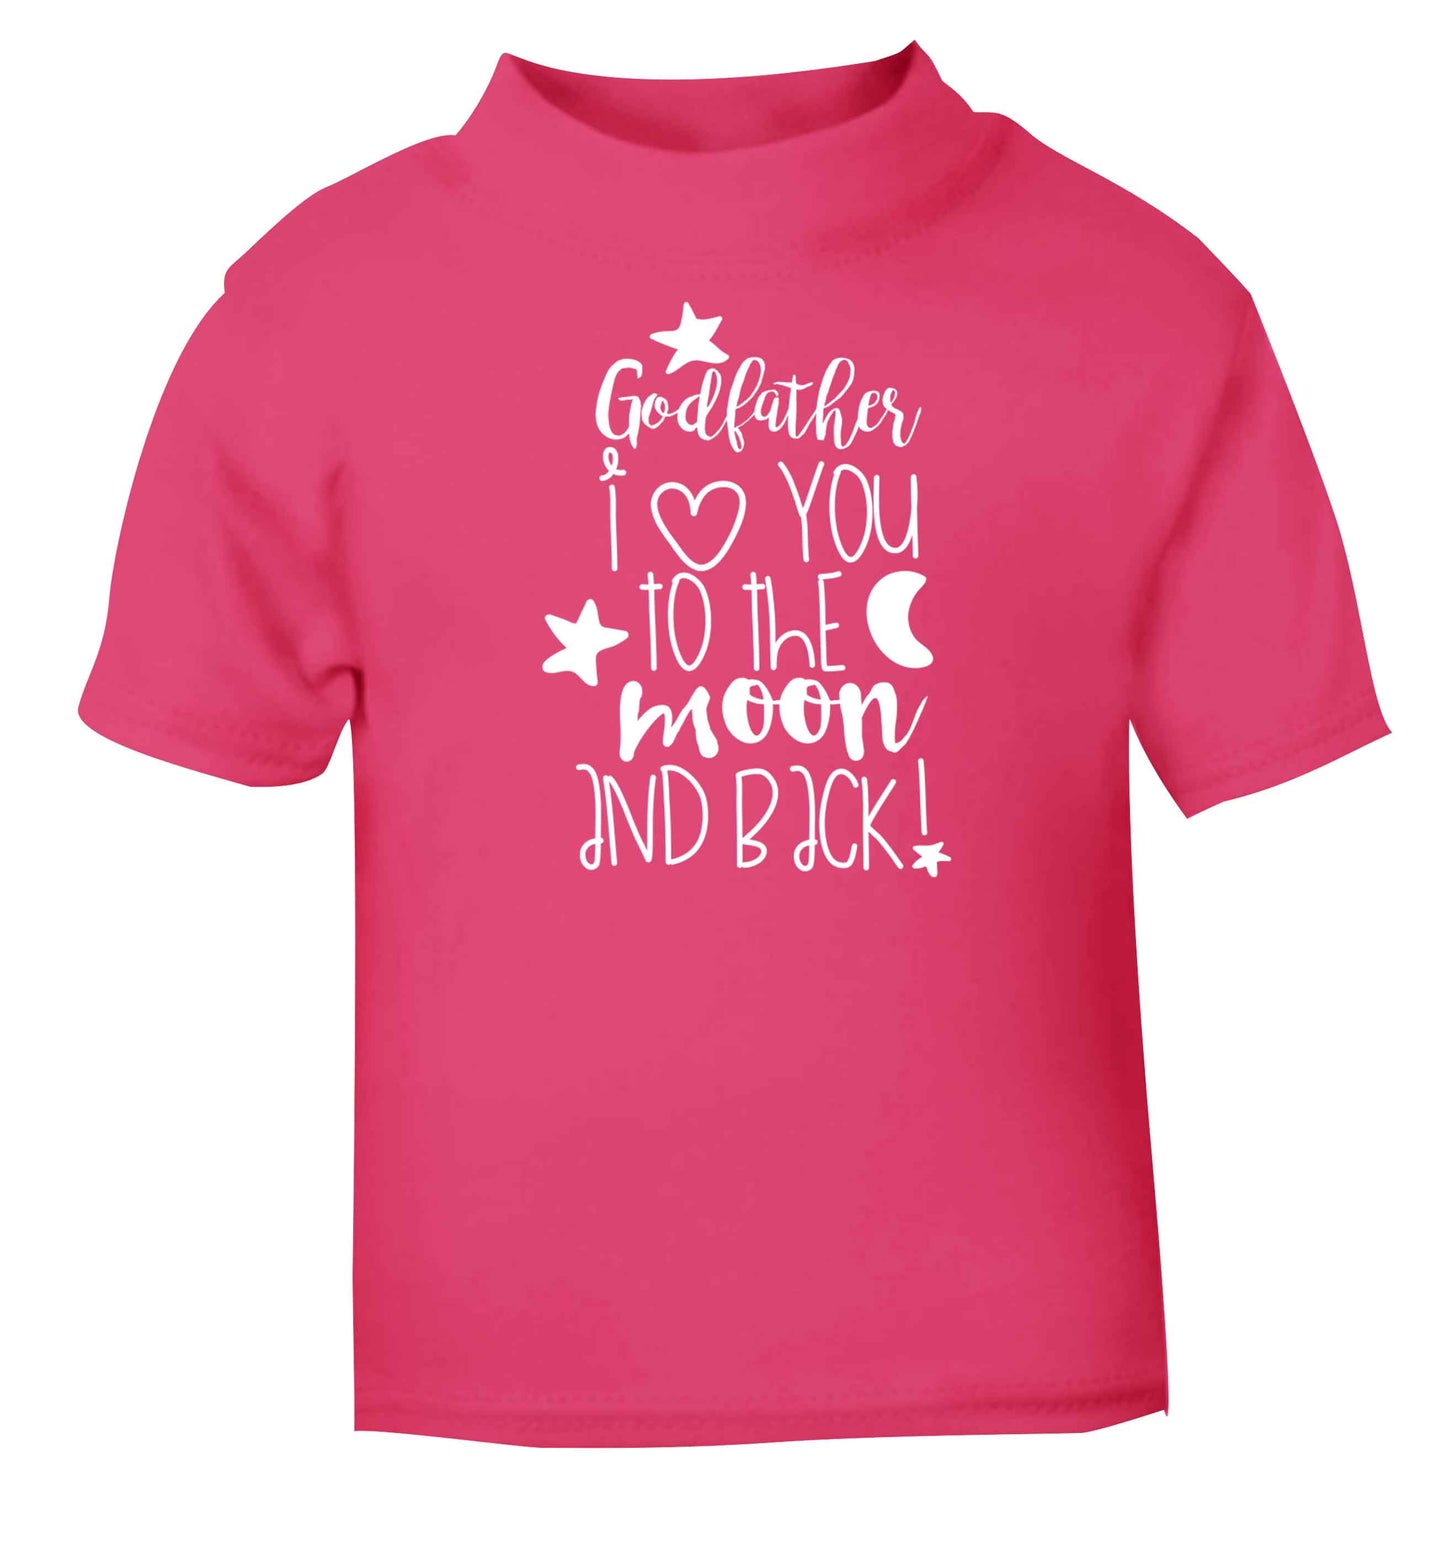 Godfather I love you to the moon and back pink baby toddler Tshirt 2 Years